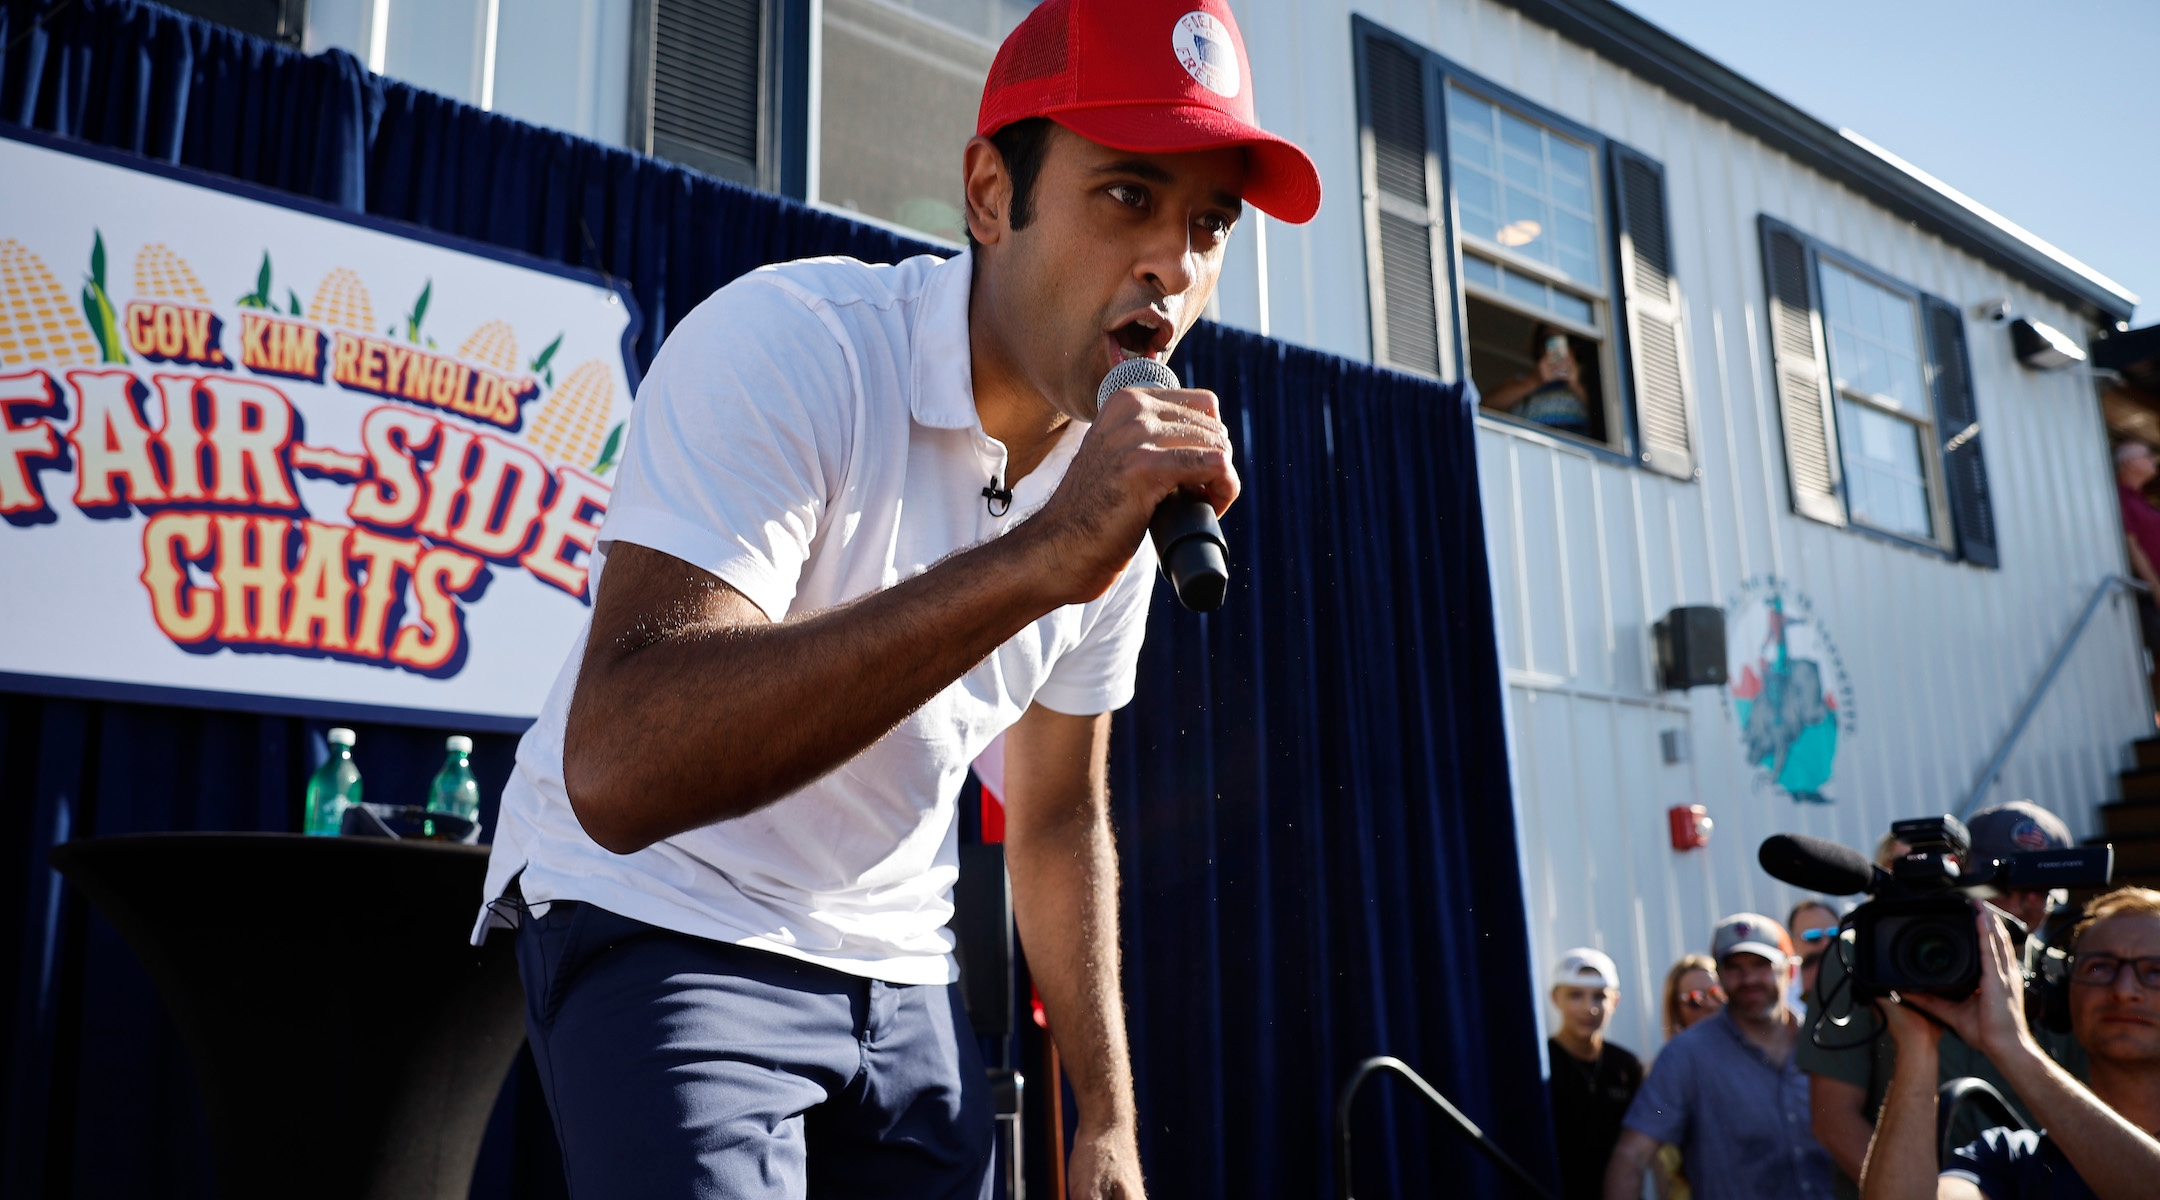 Biotech millionaire and Republican presidential candidate Vivek Ramaswamy raps to Eminem’s “Lose Yourself” at the conclusion of one of Iowa Governor Kim Reynolds’ “Fair-Side Chats” at the Iowa State Fair on August 12, 2023 in Des Moines, Iowa. (Chip Somodevilla/Getty Images)